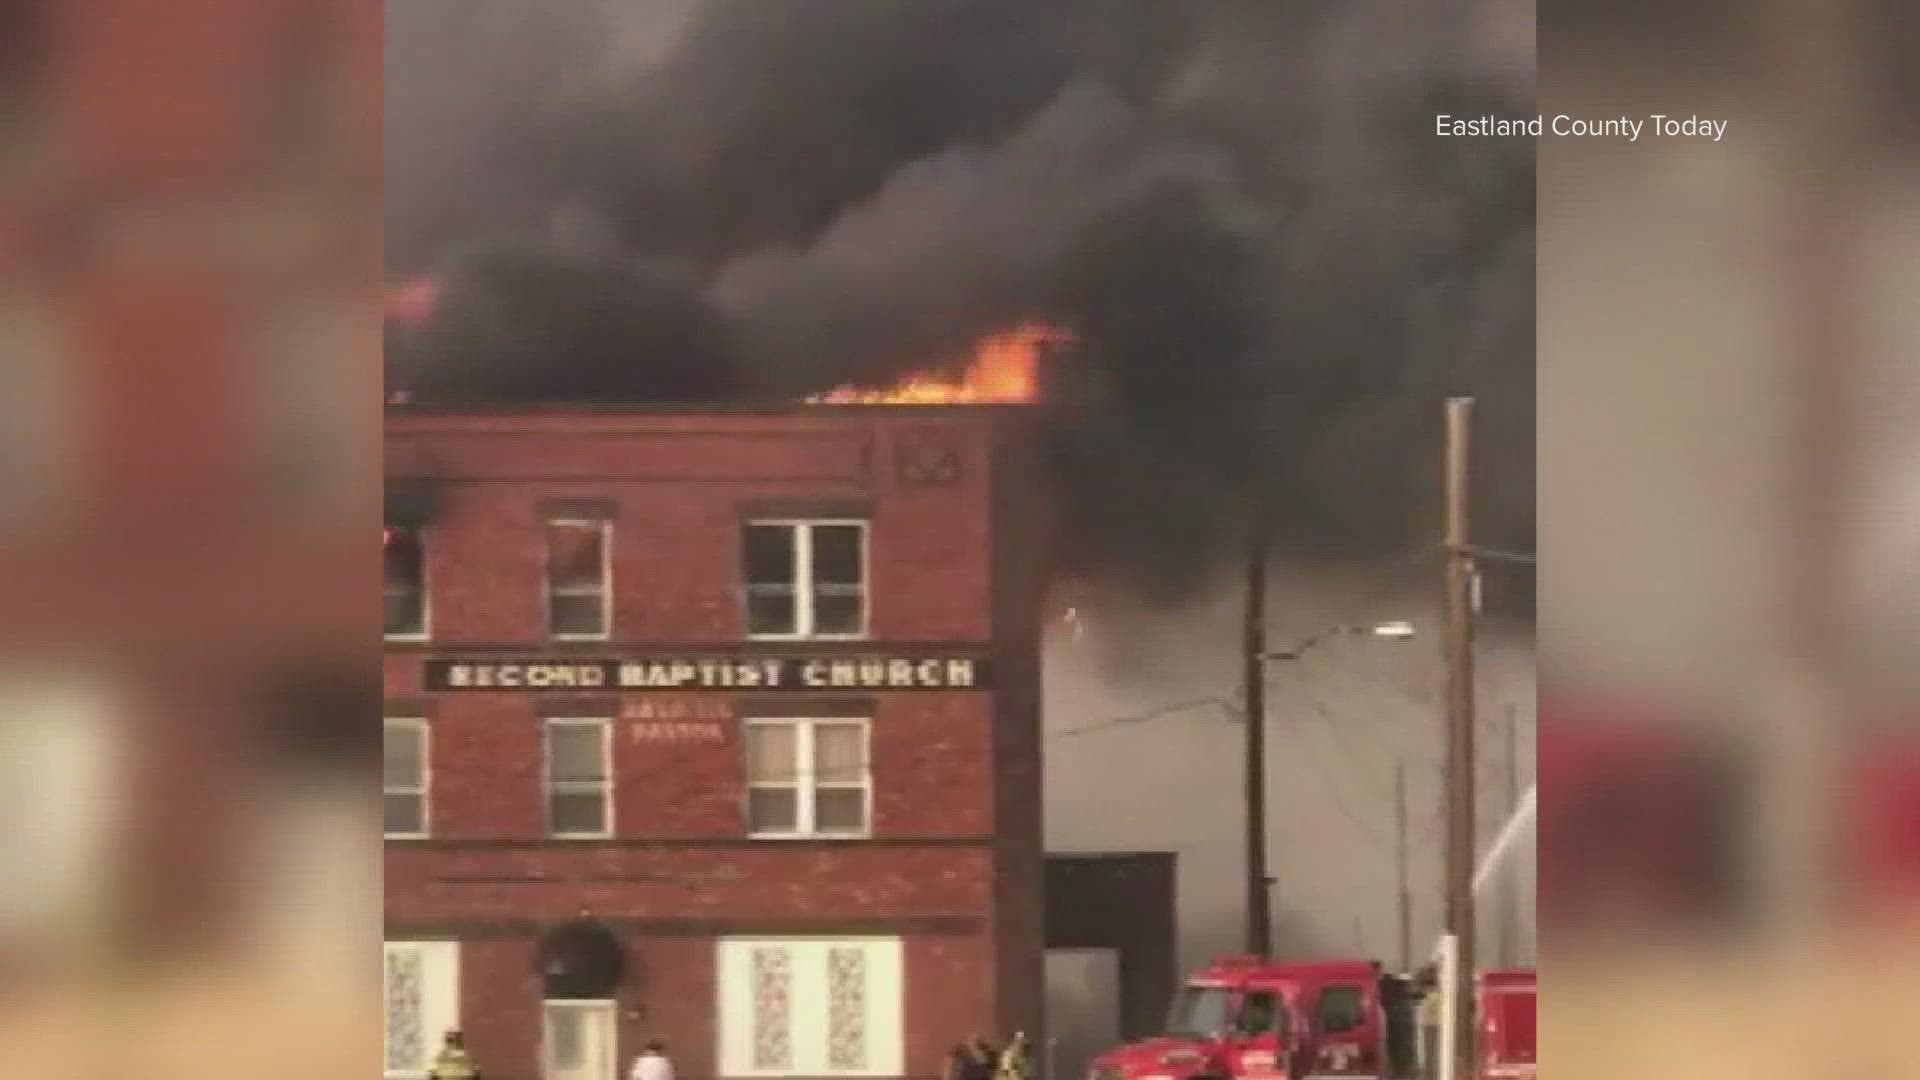 Roaring flames filled the city of Ranger's downtown area and engulfed historic structures including the police department building and a 100-year-old church.